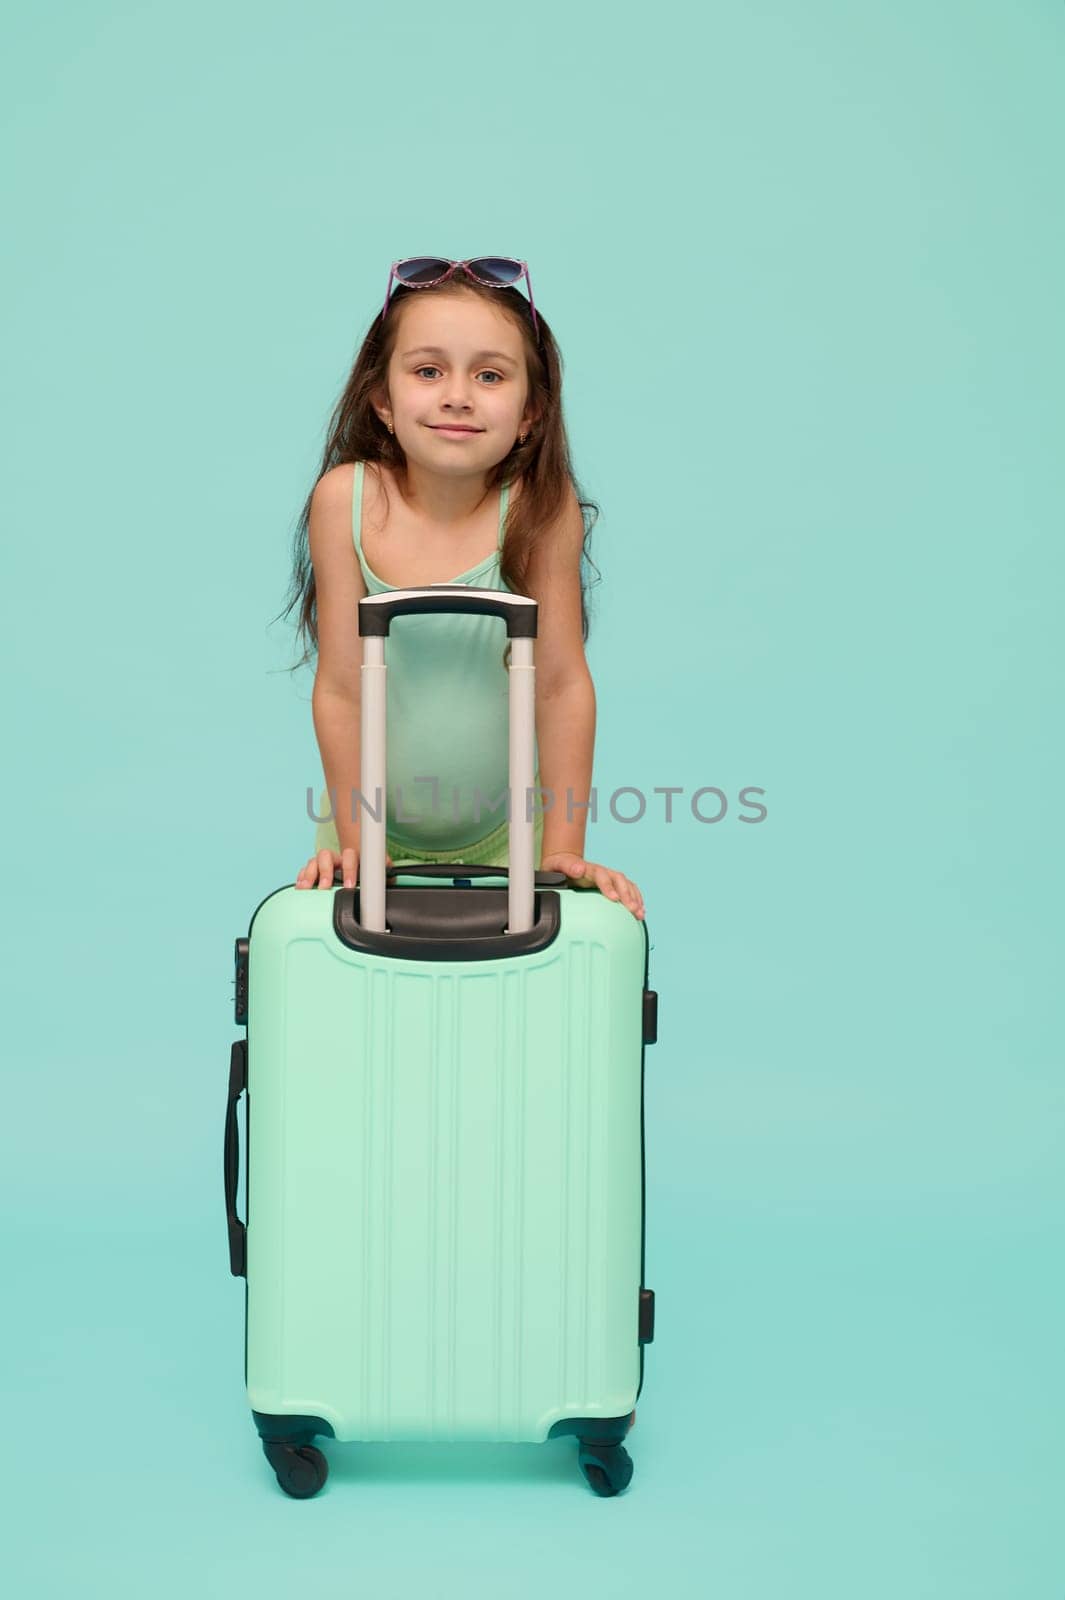 Caucasian happy child, beautiful little traveler girl with turquoise suitcase, smiles looking at camera, isolated on blue studio background. Kids. Travel. Weekend getaway and summer holidays concept